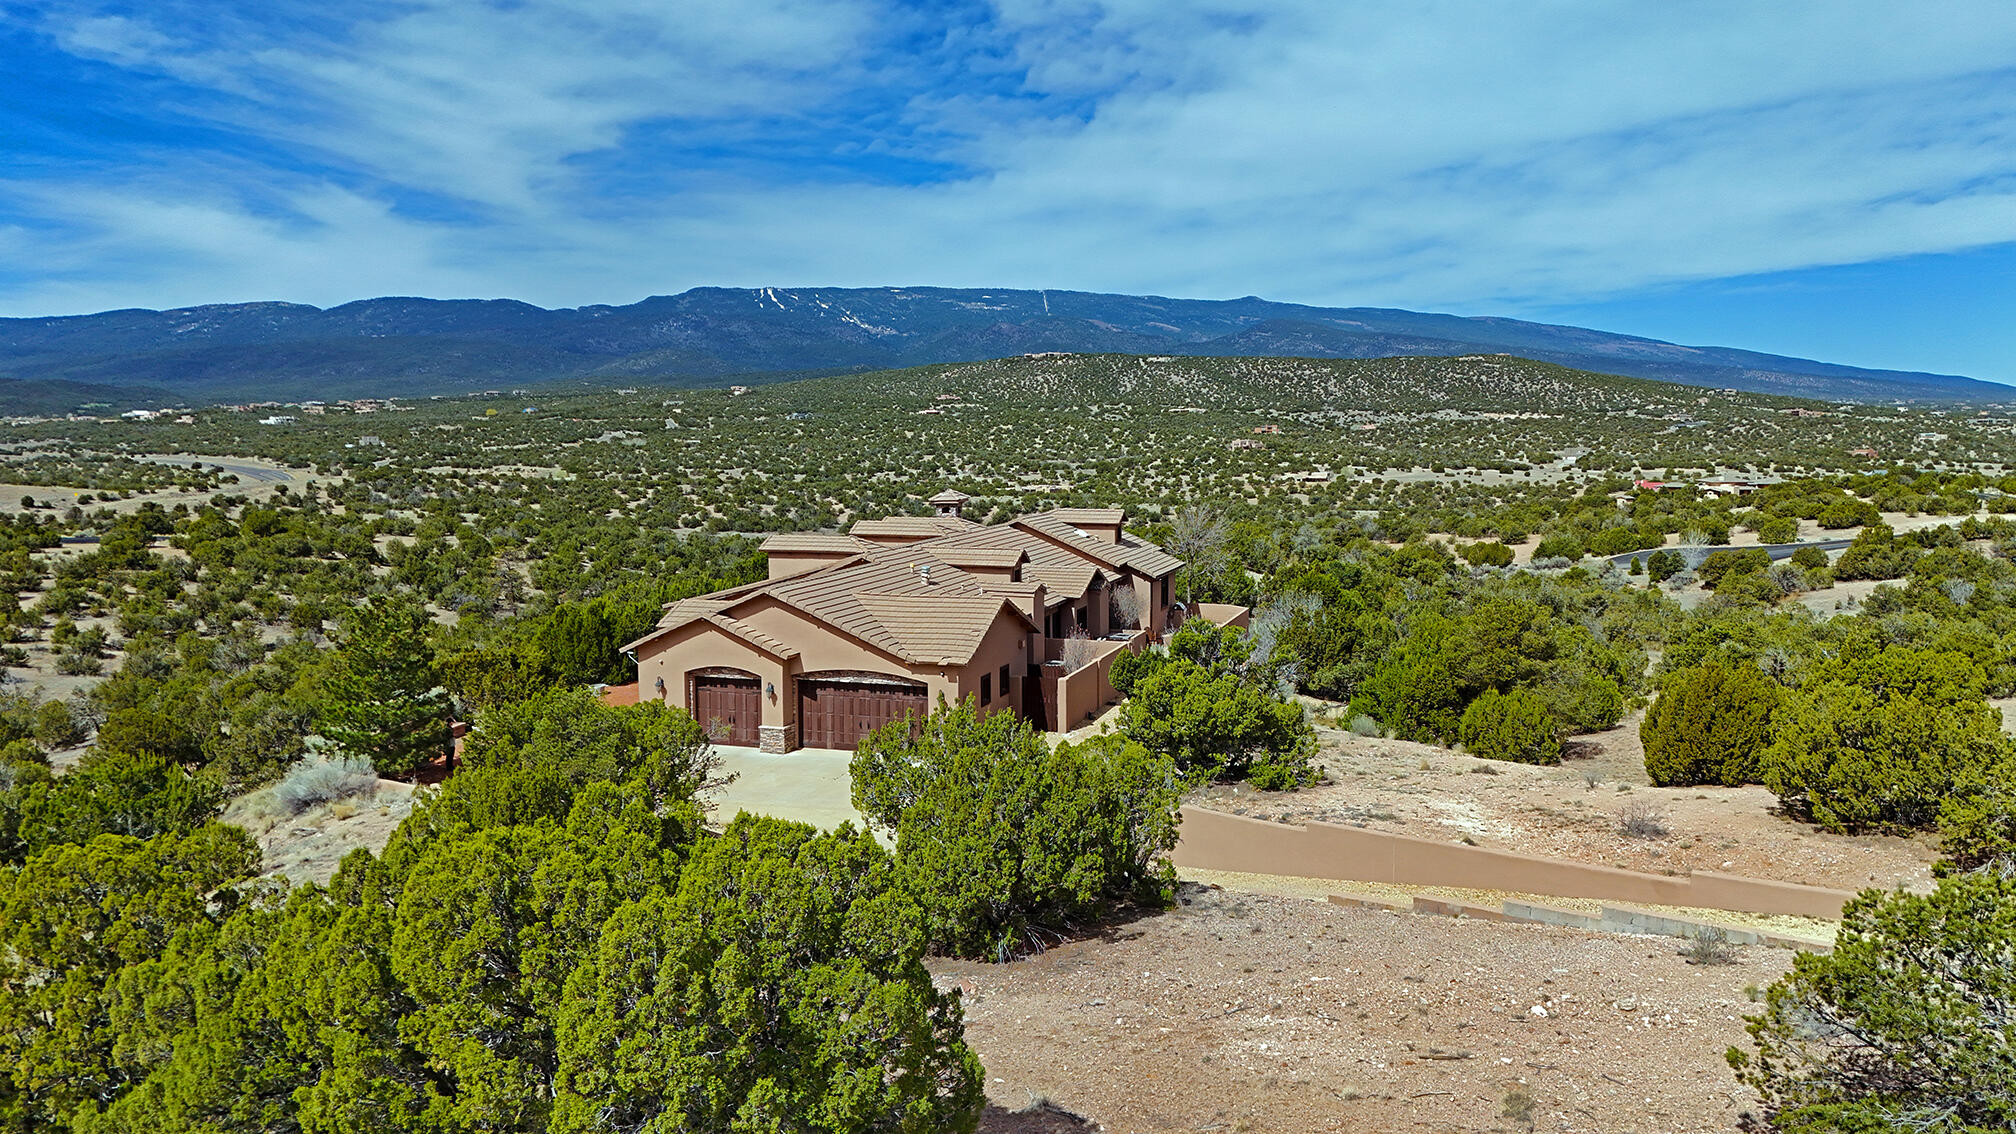 San Pedro Overlook @Campbell Ranch is a world apart. A world w/625 acres of protected nature preserve & spectacular NM East Mountain views. An active world with hiking & easy access to golf, skiing & biking provide an extraordinary lifestyle.  Custom unique features abound on this 3.3 acre property. 3 bedrooms + study, 2 large bathrooms w/steam shower & luxurious tub perfect for relaxing. Unobstructed  VIEWS from every window.A wrap around porch is perfect for taking in the views while enjoying morning coffee or an afternoon glass of wine in this peaceful setting.  Gourmet kitchen w/ Viking gas stove & more. Separate room off garage perfect for studio or theatre room. This community has none of the city's distractions, but all of its amenities, just minutes from ABQ or Santa Fe